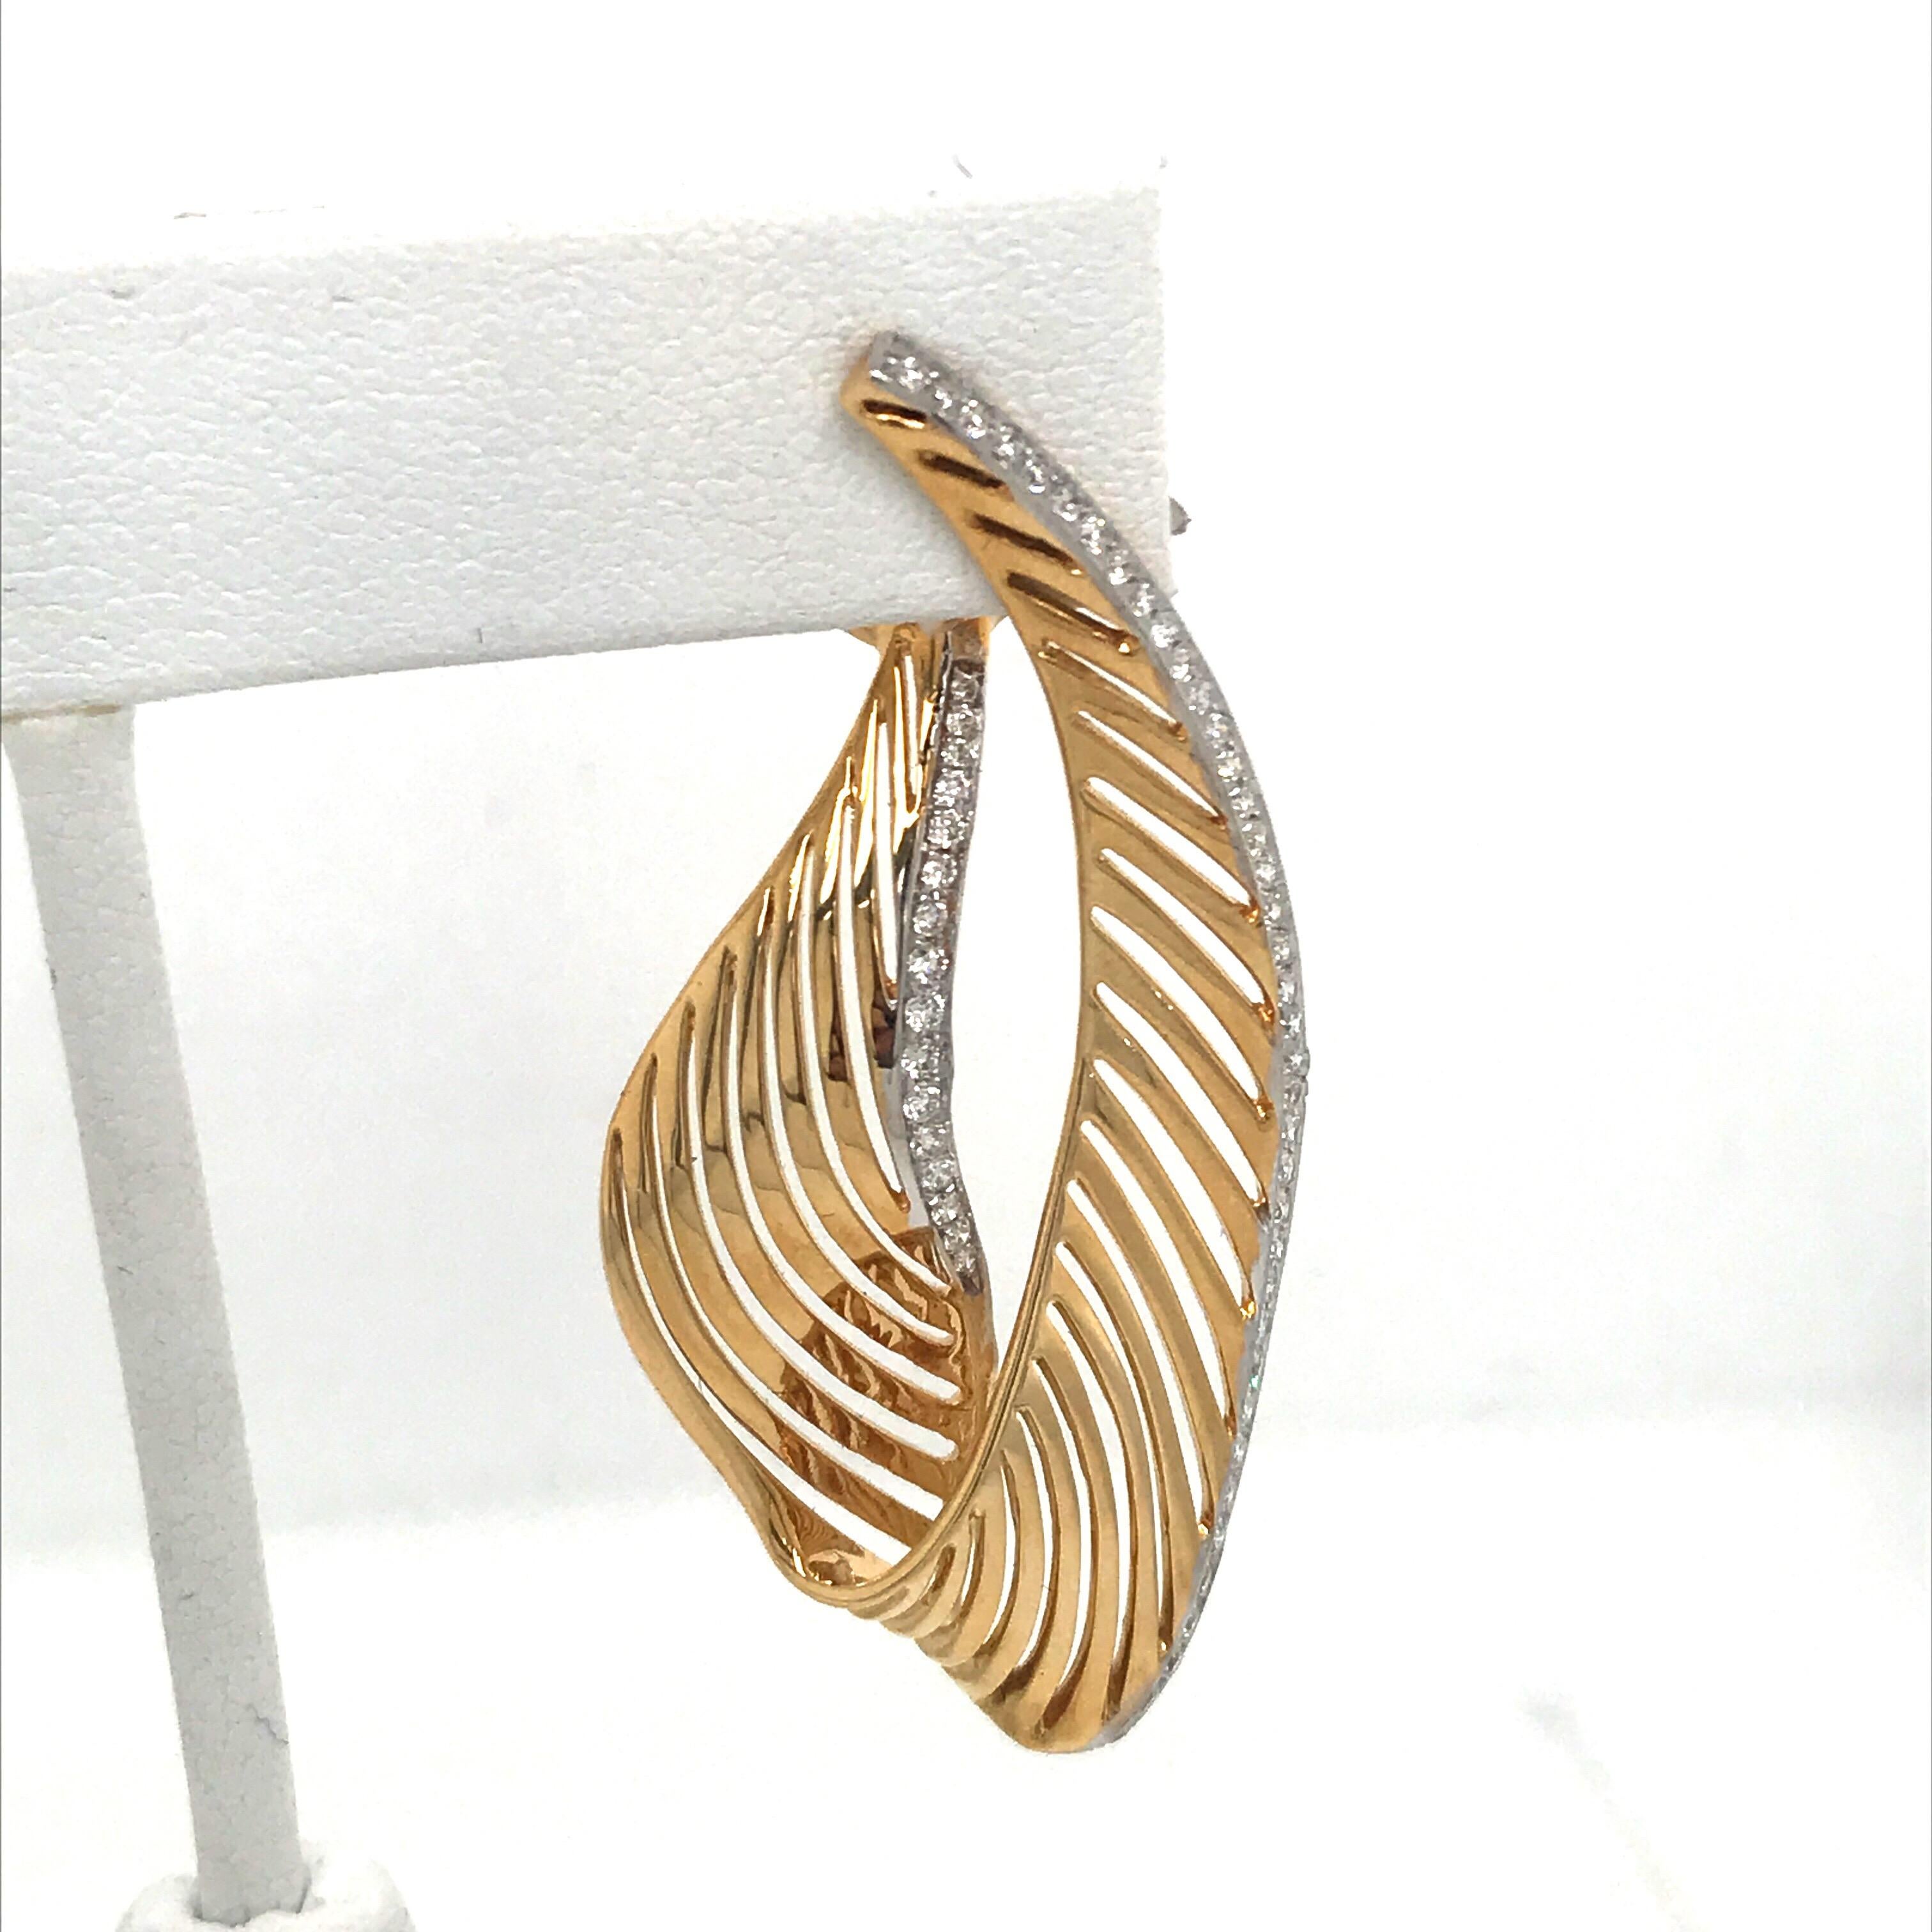 18K Yellow gold swirl drop earrings featuring 112 round brilliants weighing 1.03 carats. 
Color H
Clarity SI